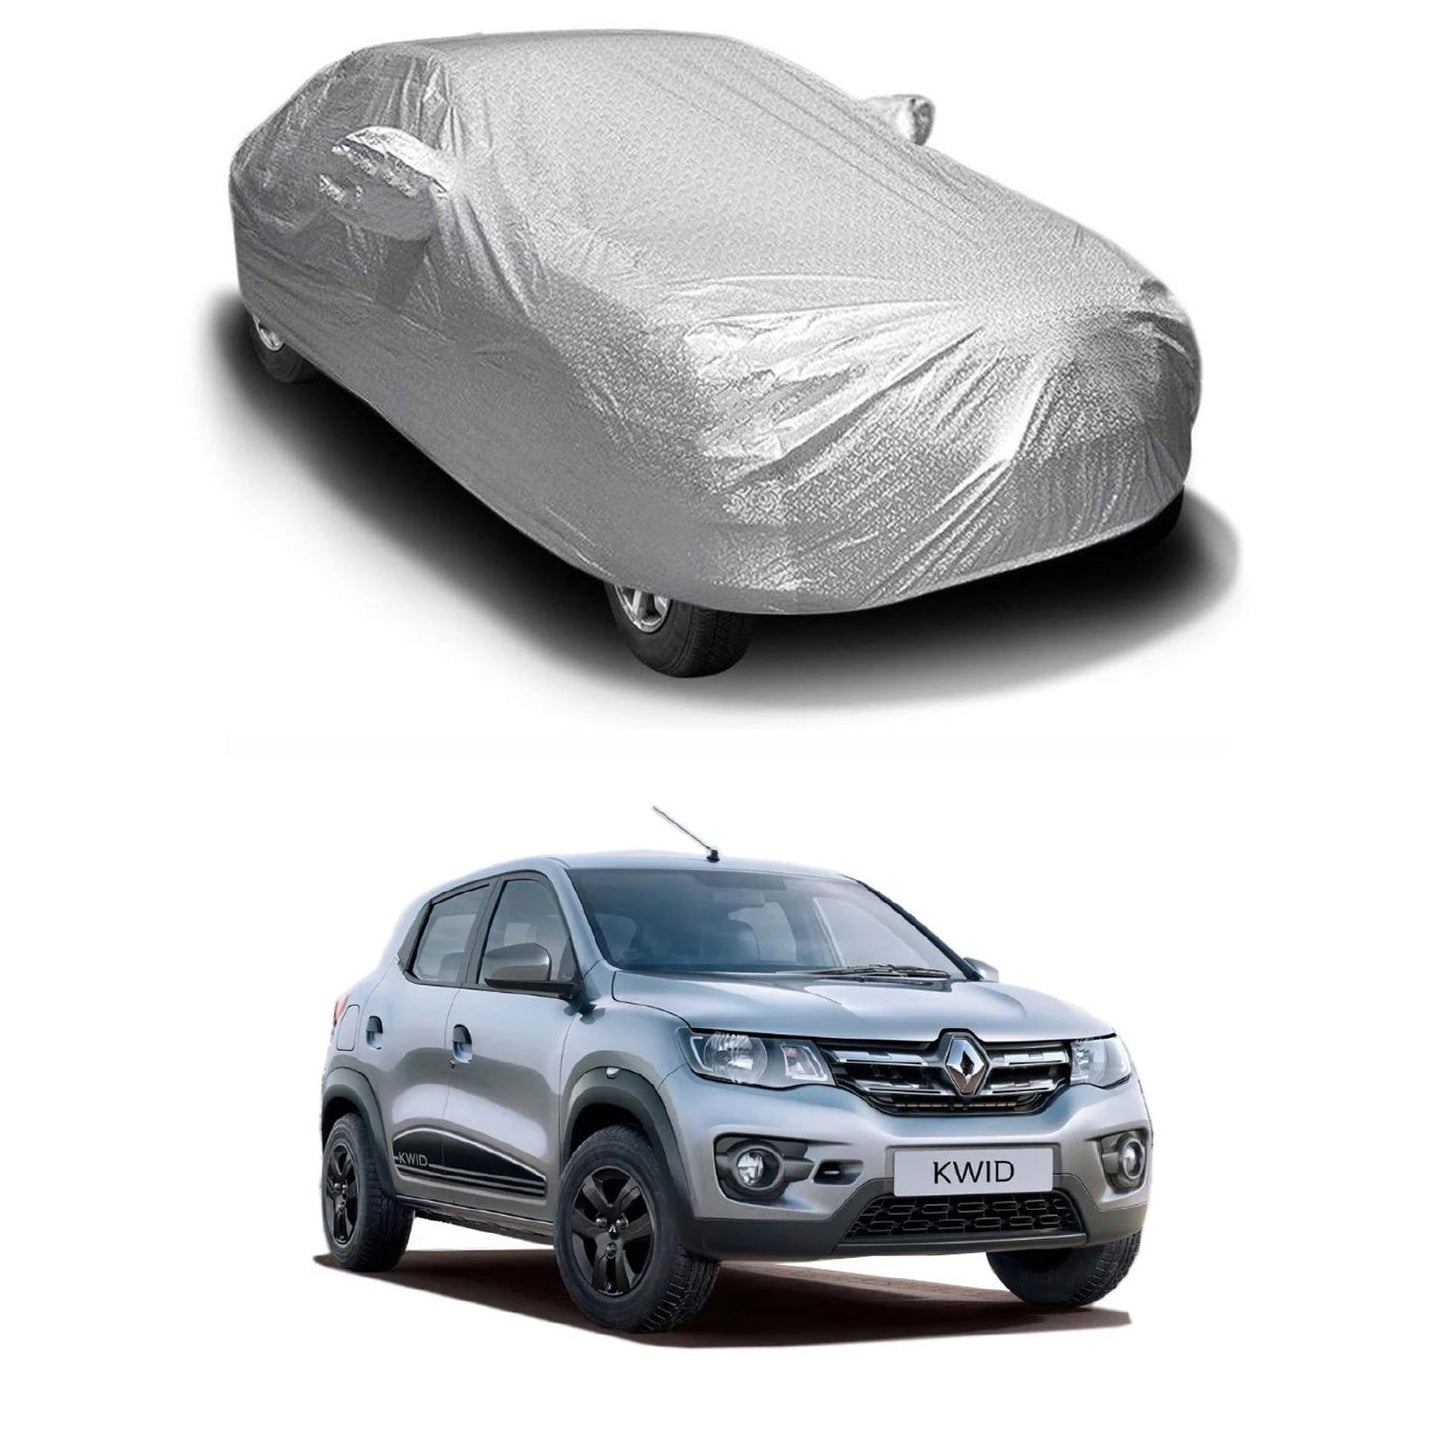 Oshotto Spyro Silver Anti Reflective, dustproof and Water Proof Car Body Cover with Mirror Pockets For Renault Kwid